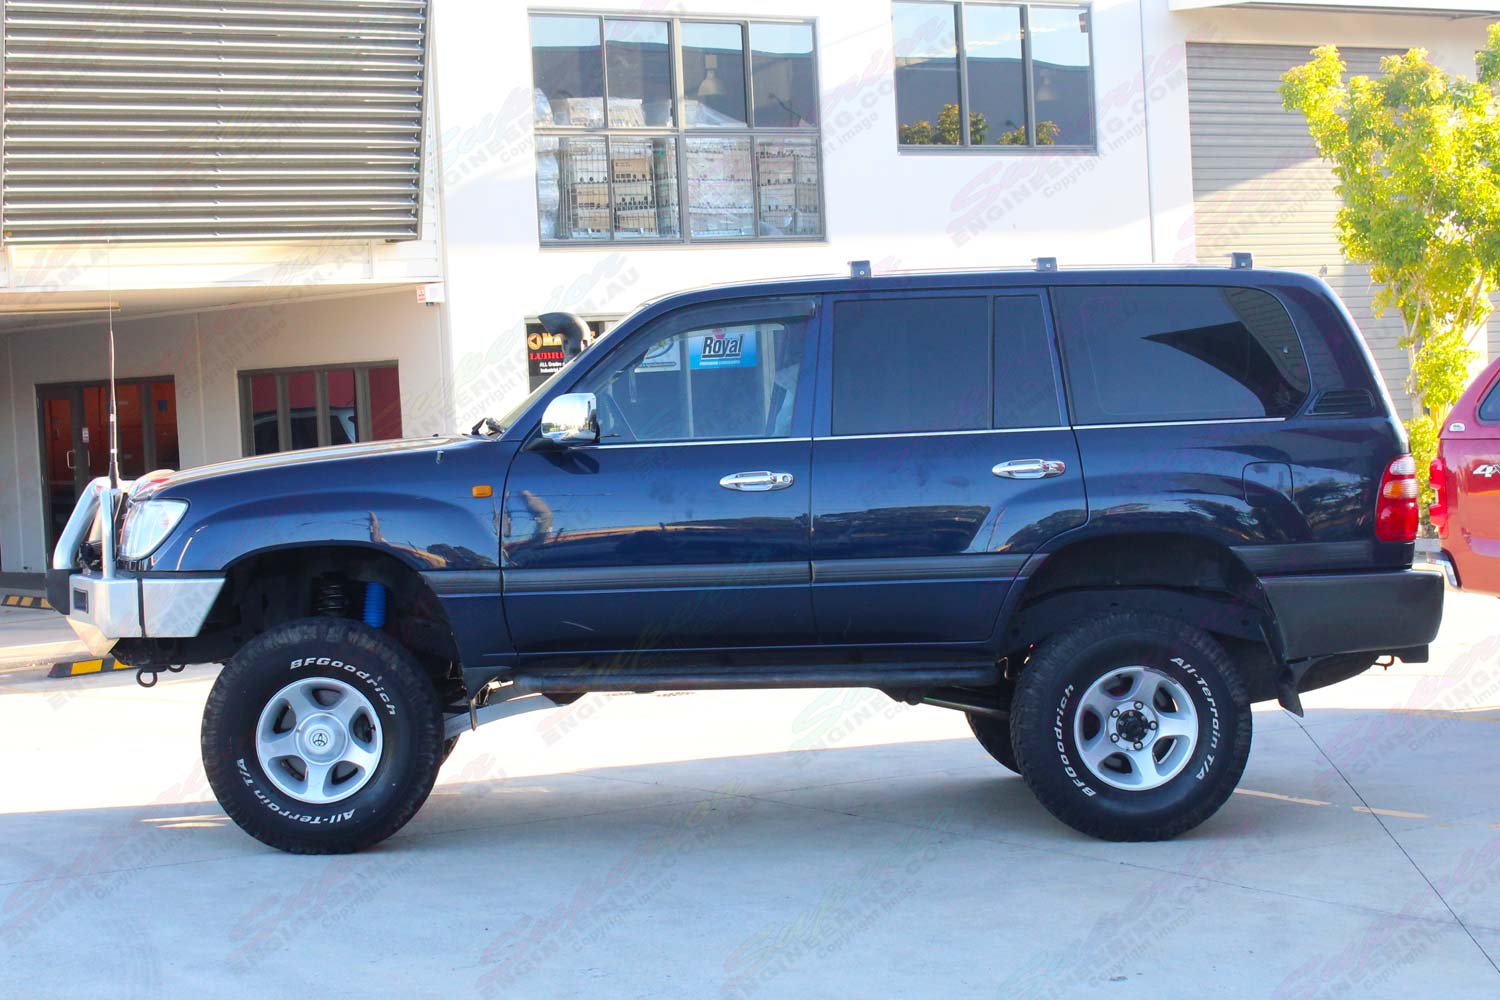 Left side view of a blue 105 Series Toyota Landcruiser after being fitted with a top of the range 4" inch lift kit